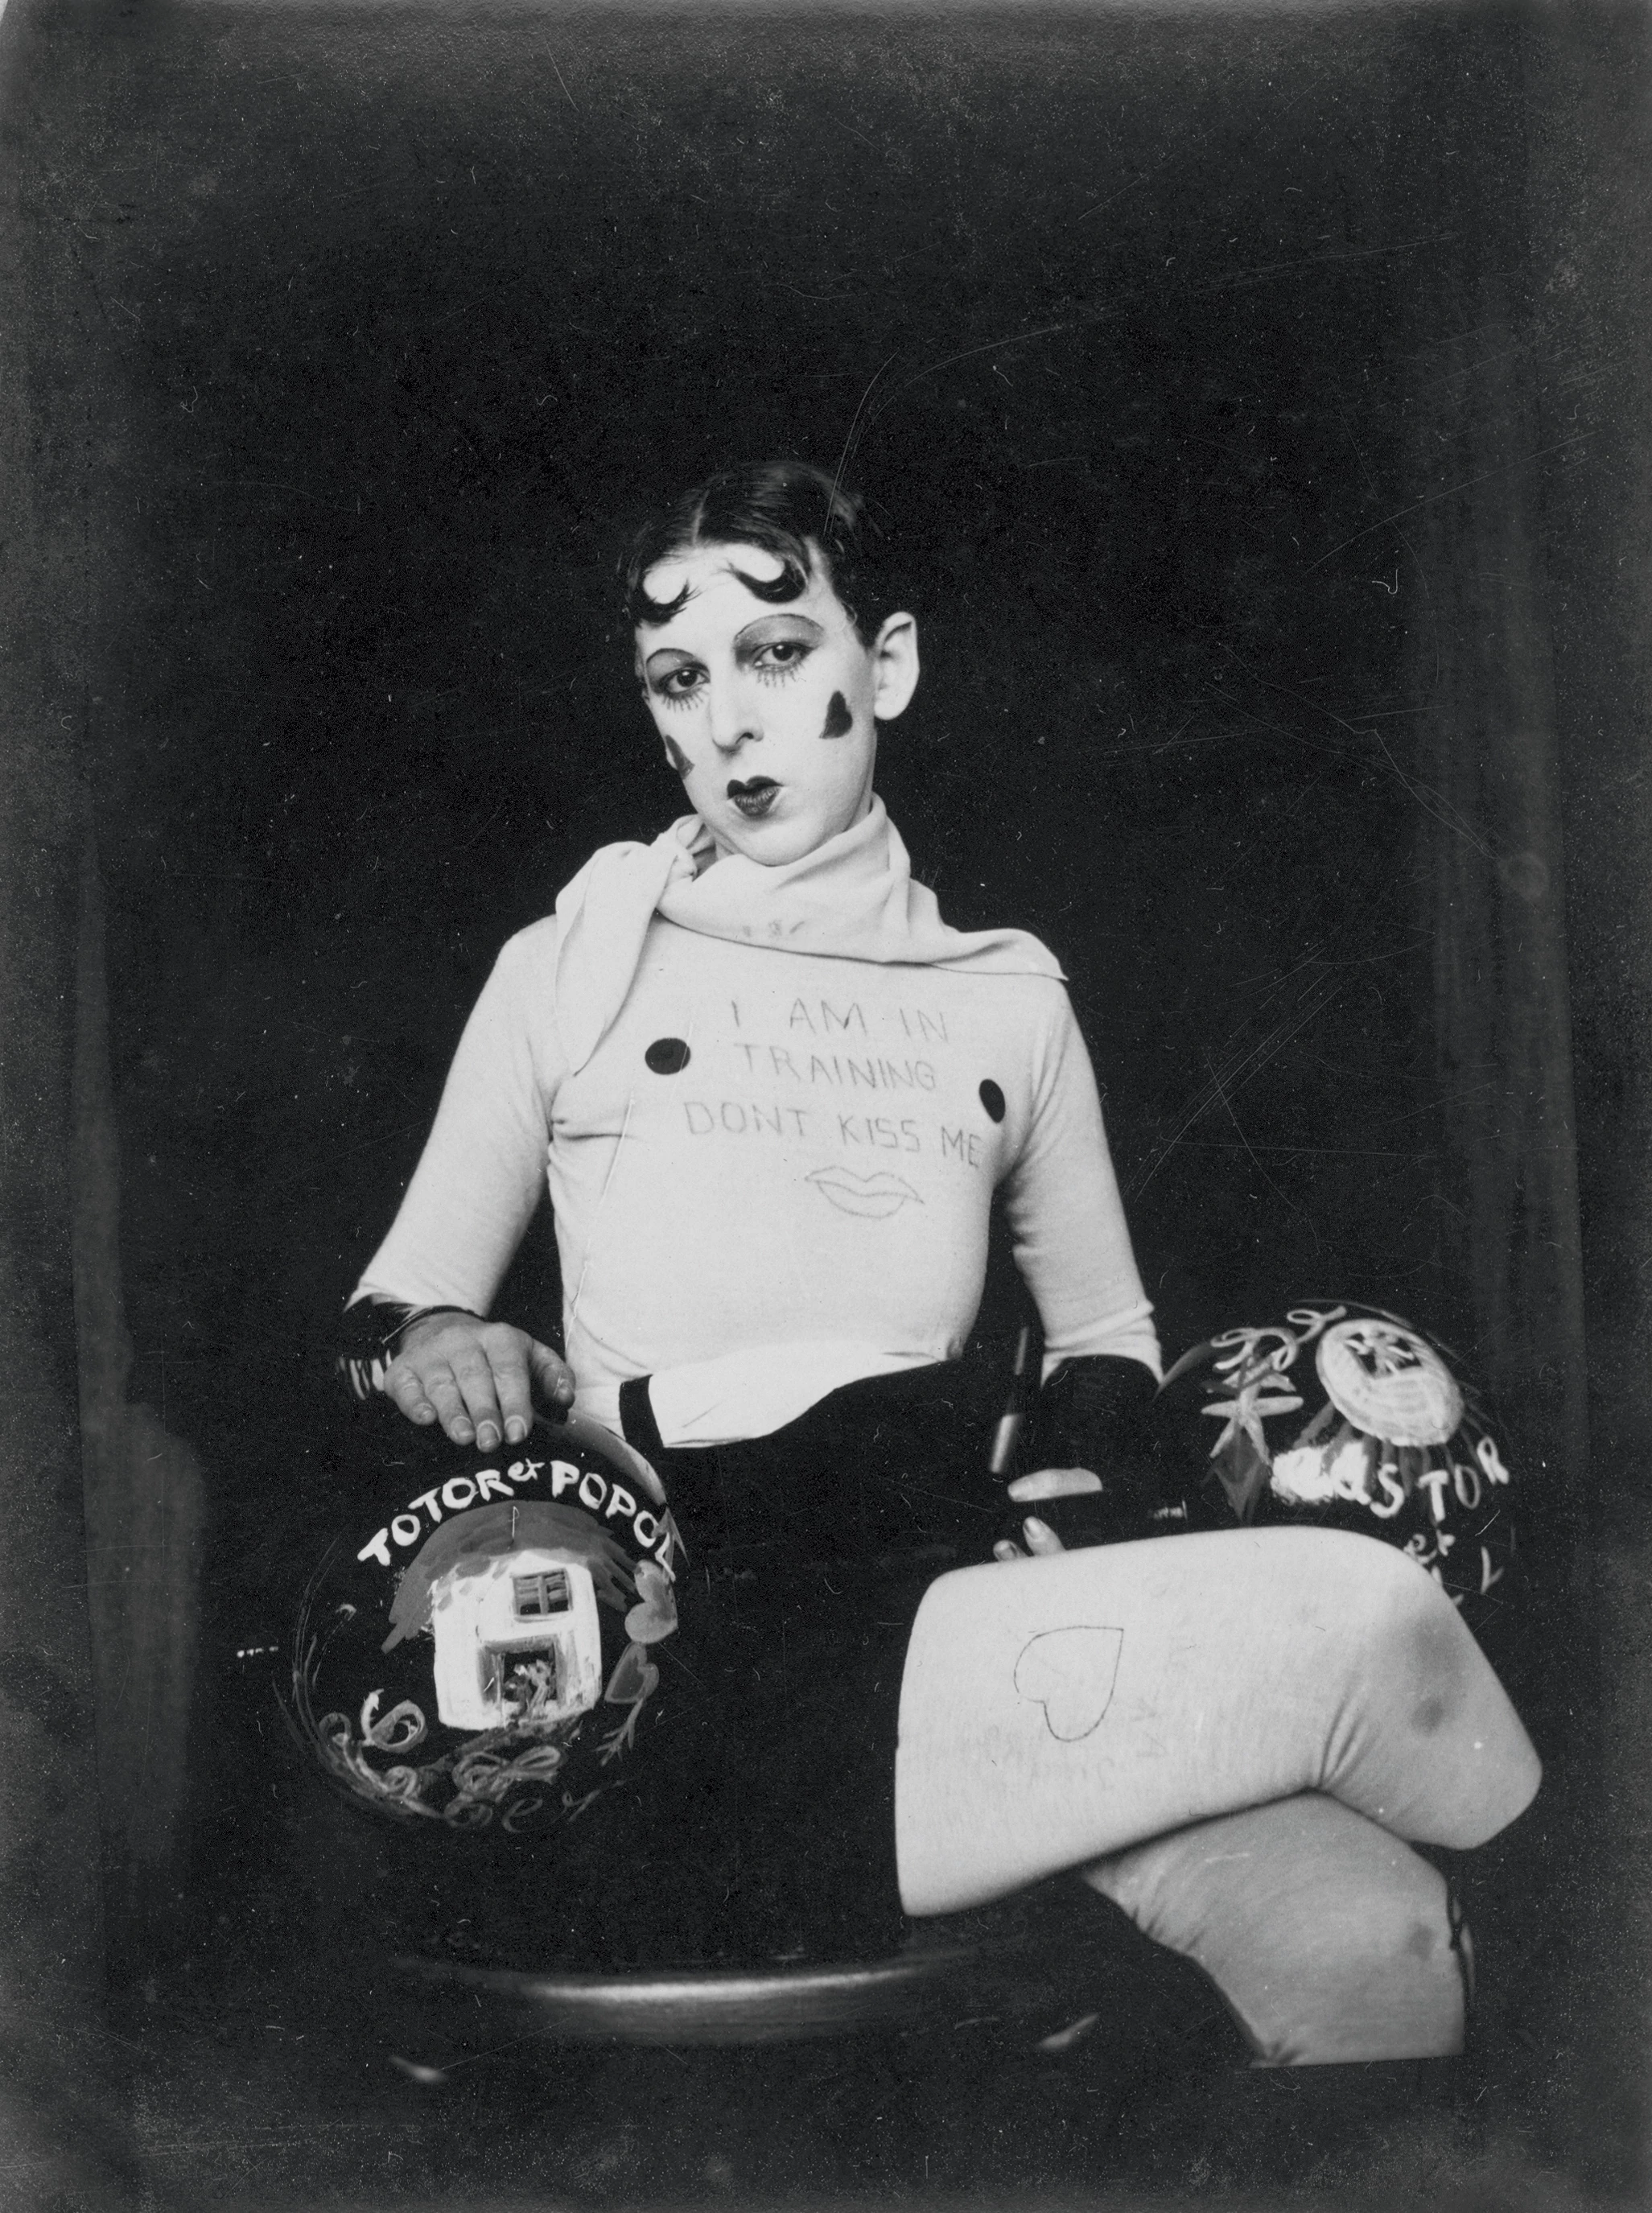 I am in training, don't kiss me, Claude Cahun